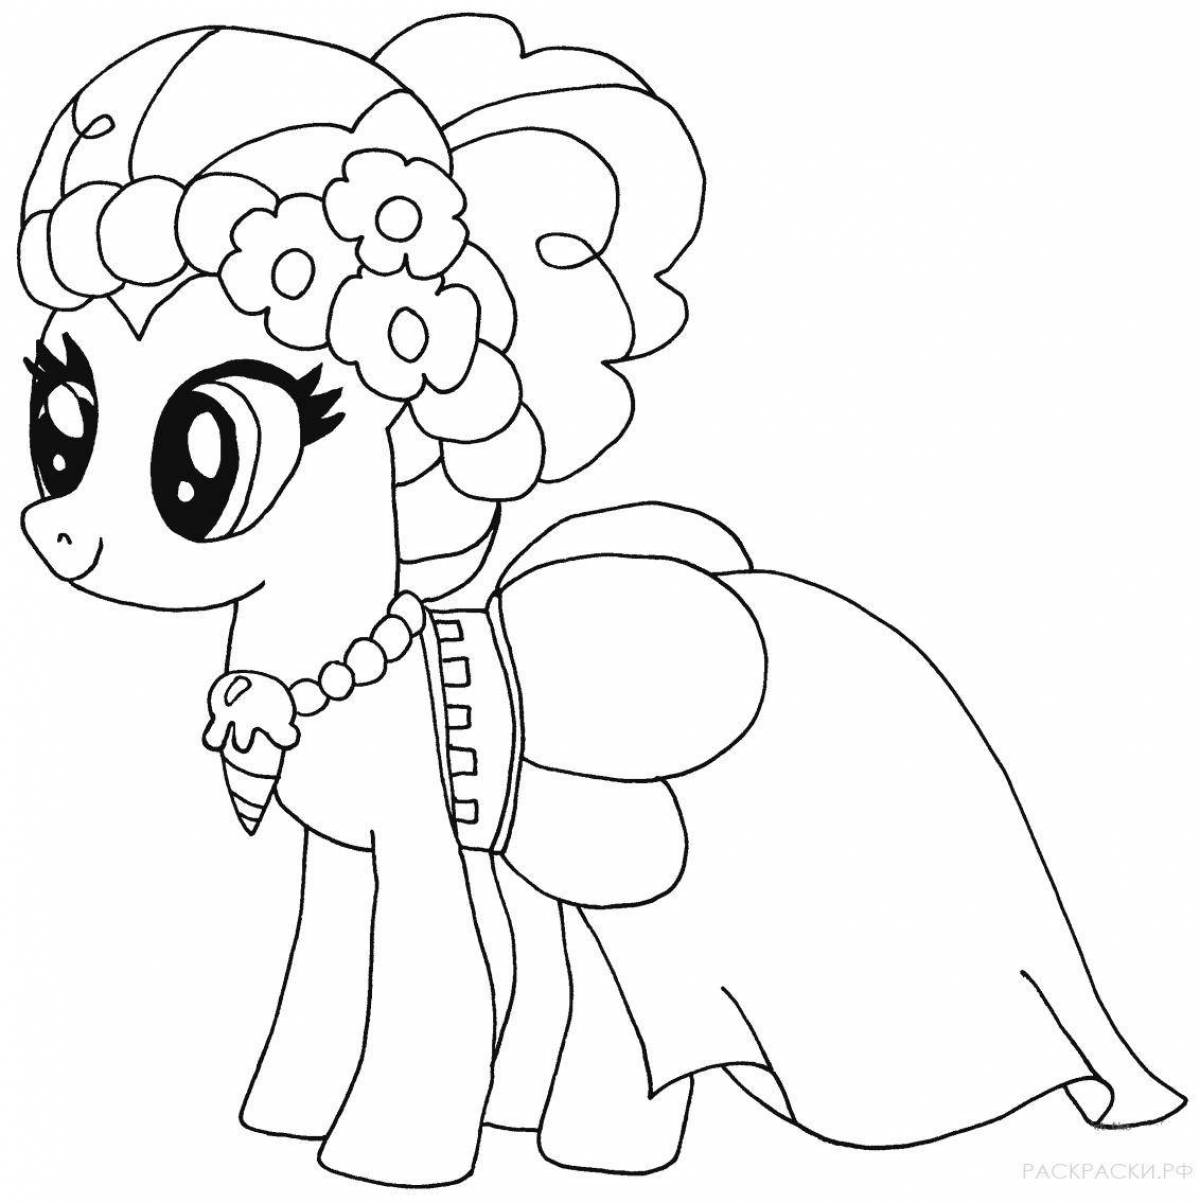 Unusual coloring of a pony in a dress